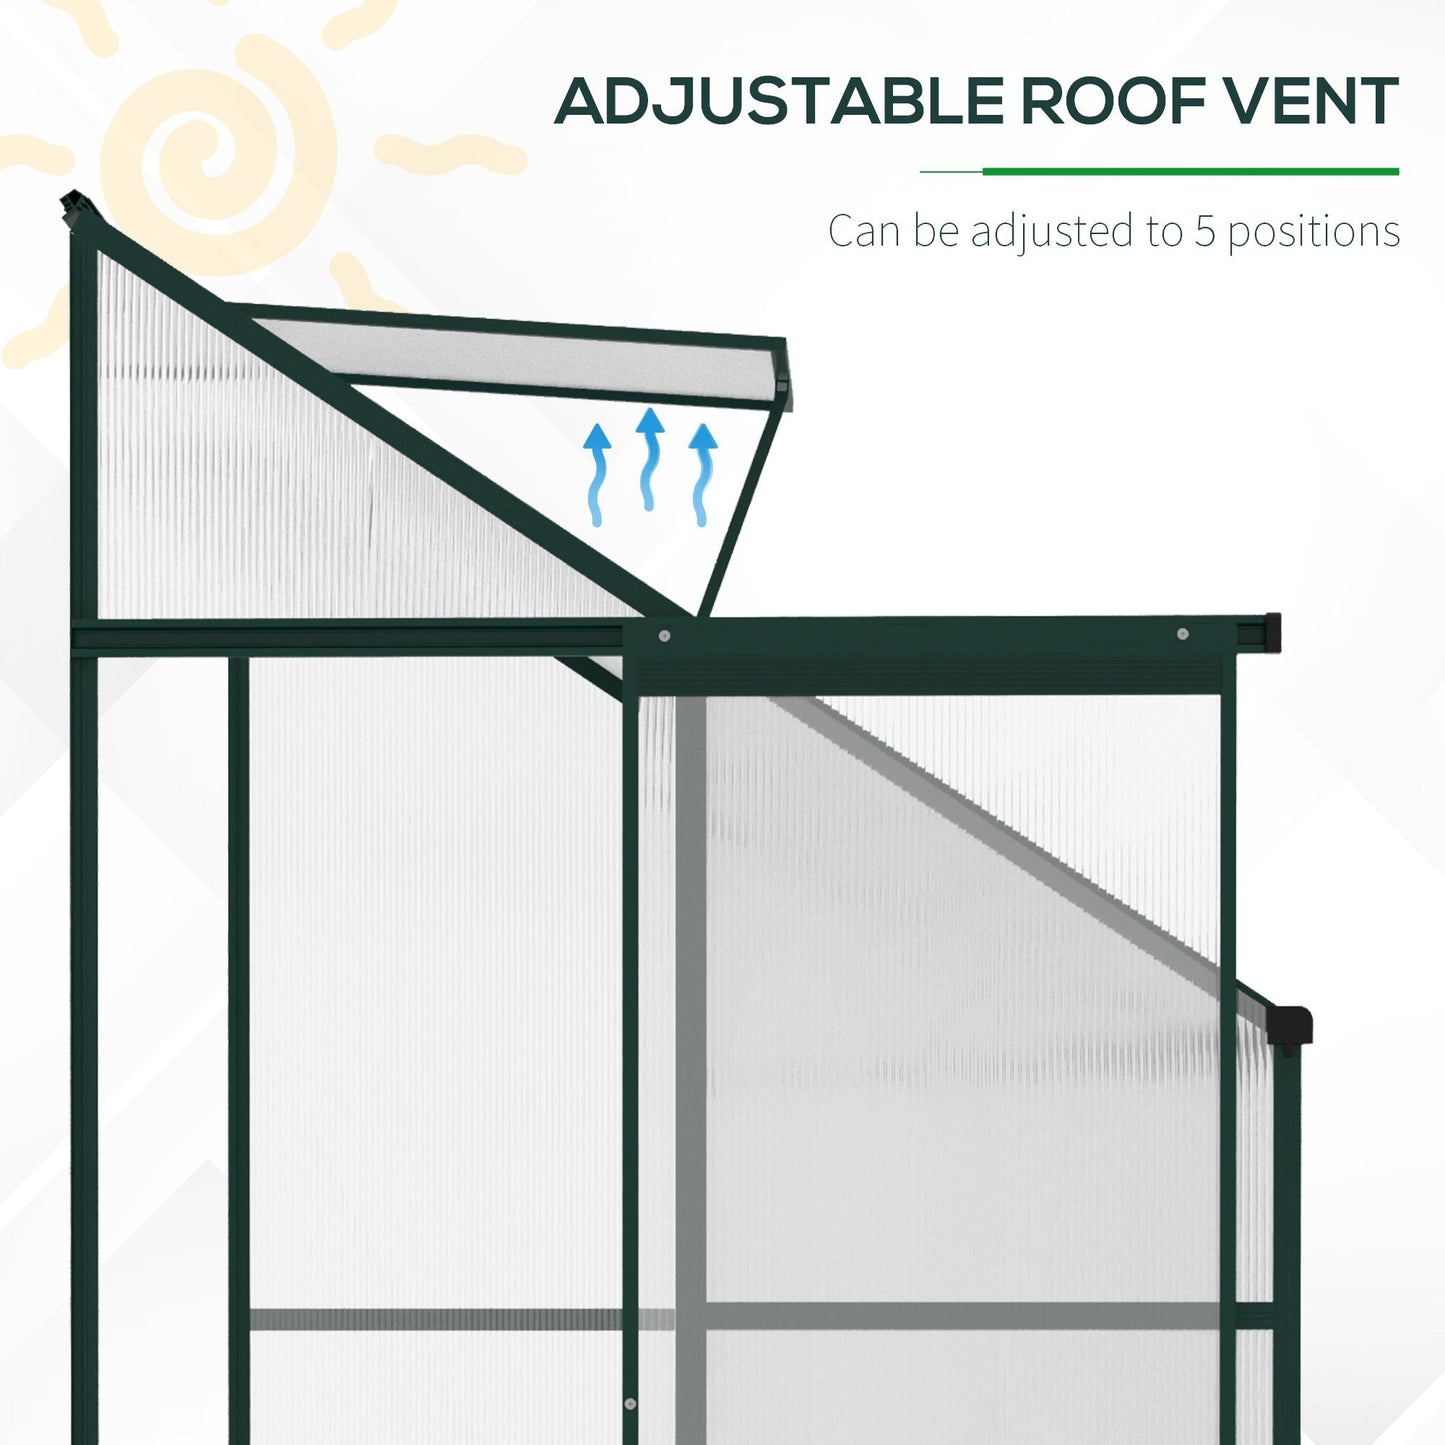 Outdoor and Garden-Walk-In Garden Greenhouse Aluminum Polycarbonate with Roof Vent for Plants Herbs Vegetables 6' x 4' x 7' Green - Outdoor Style Company